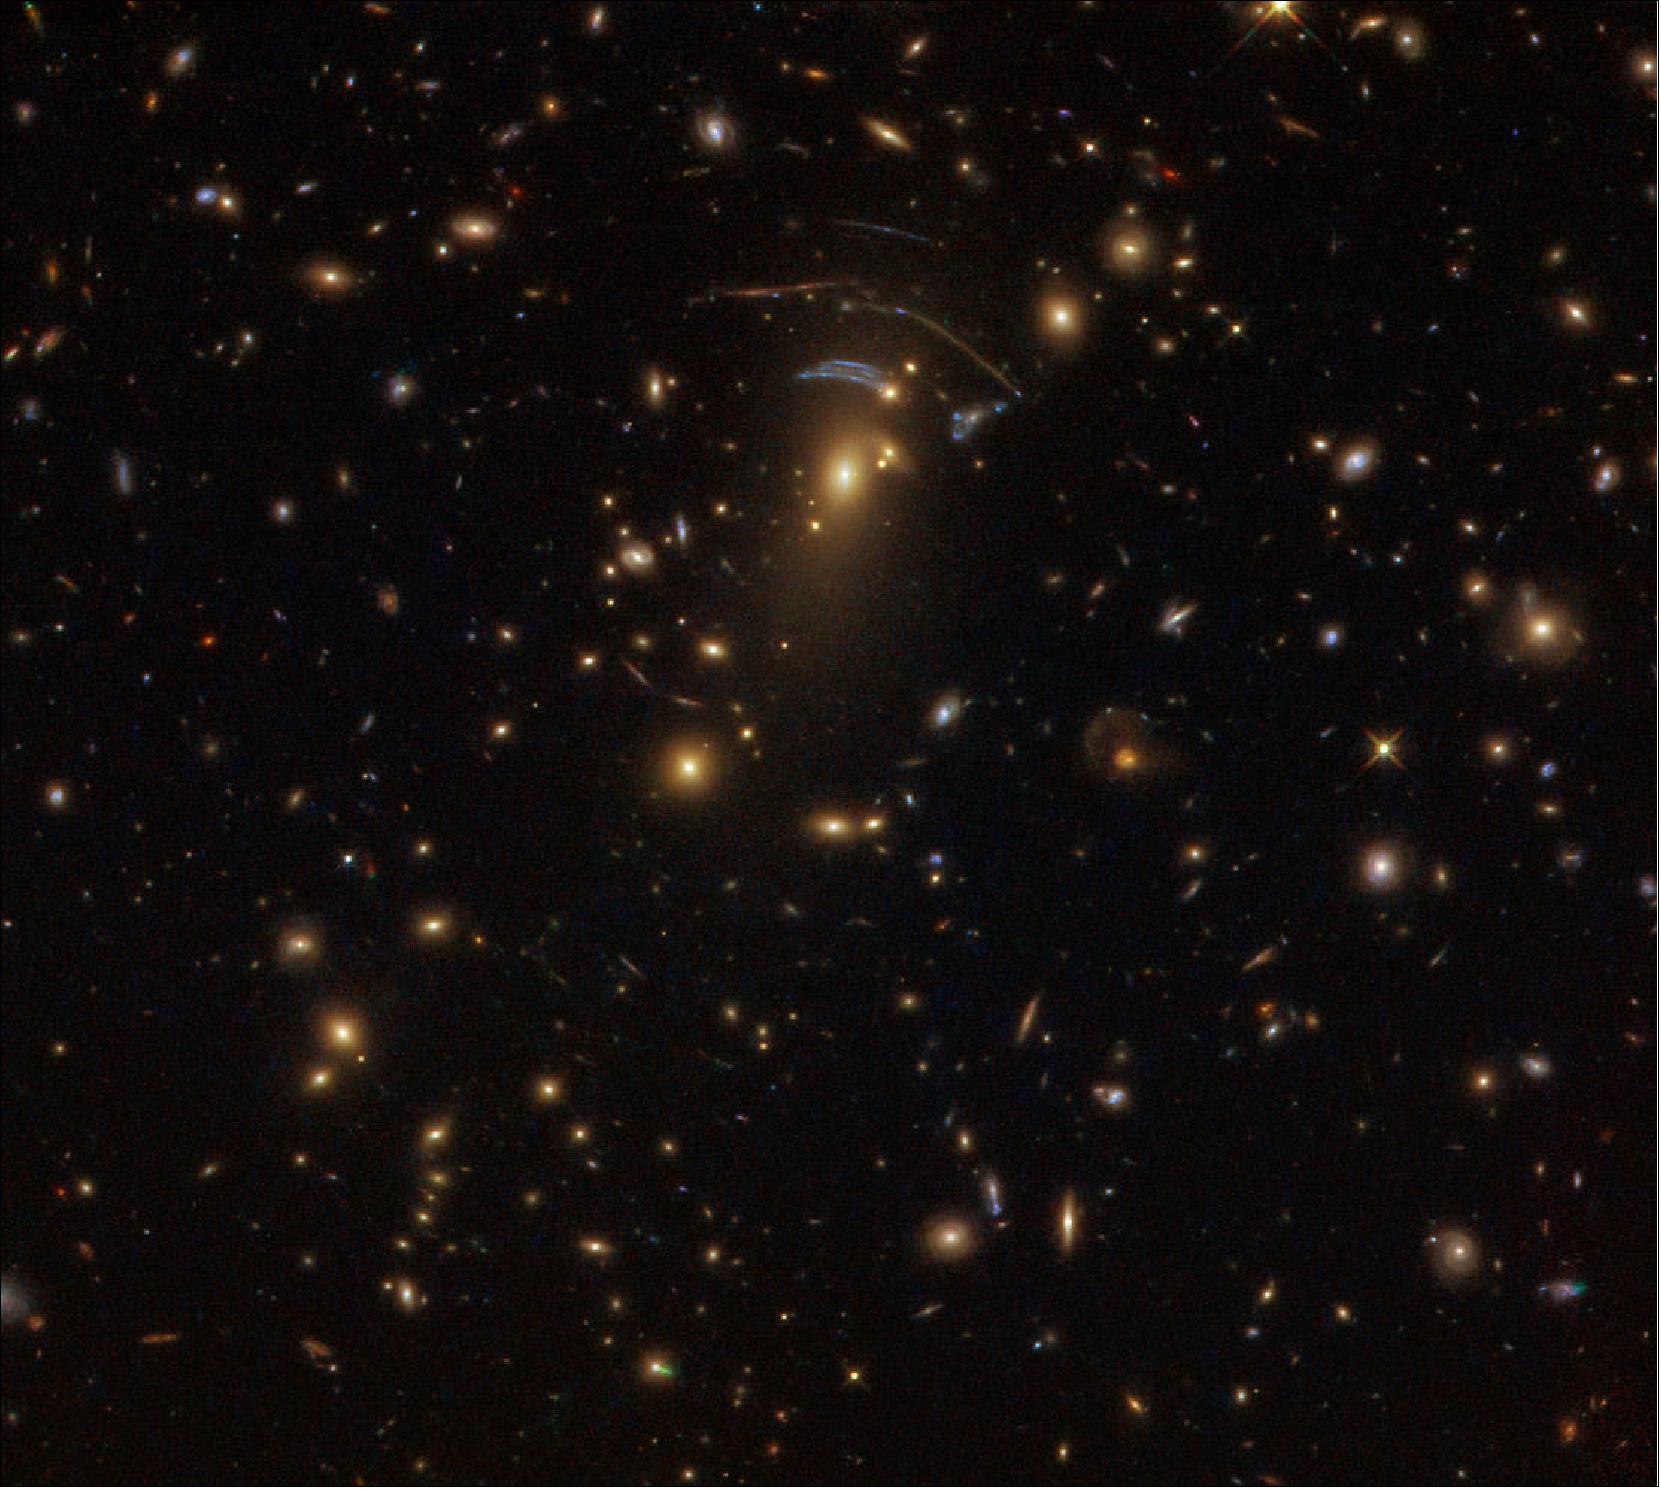 Figure 21: This image was taken with the NASA/ESA Hubble Space Telescope’s Wide Field Camera 3 (WFC3) and shows an object named SDSS J1138+2754. It acts as a gravitational lens illustrating the true strength of gravity: A large mass — a galaxy cluster in this case — is creating such a strong gravitational field that it is bending the very fabric of its surroundings. This causes the billion-year-old light from galaxies sitting behind it to travel along distorted, curved paths, transforming the familiar shapes of spirals and ellipticals (visible in other parts of the image) into long, smudged arcs and scattered dashes (image credit: ESA/Hubble & NASA; Acknowledgement: Judy Schmidt; CC BY 4.0)